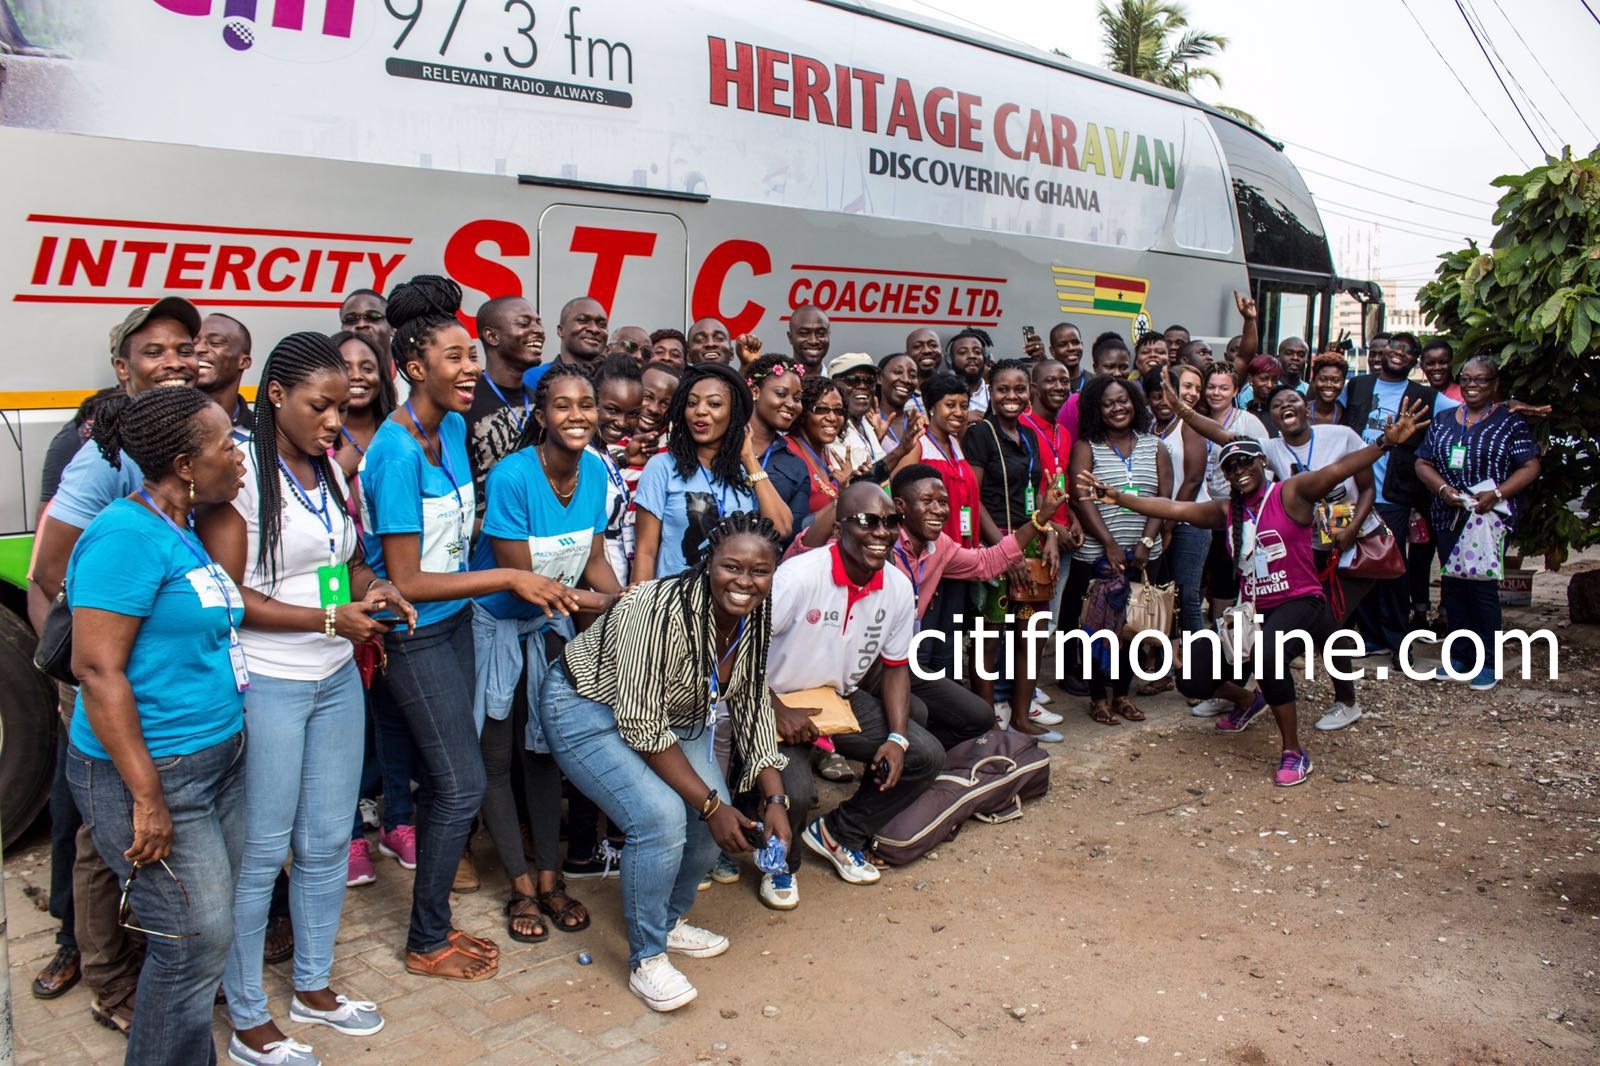 Citi FM’s exciting Heritage Caravan set to hit the road this Sunday